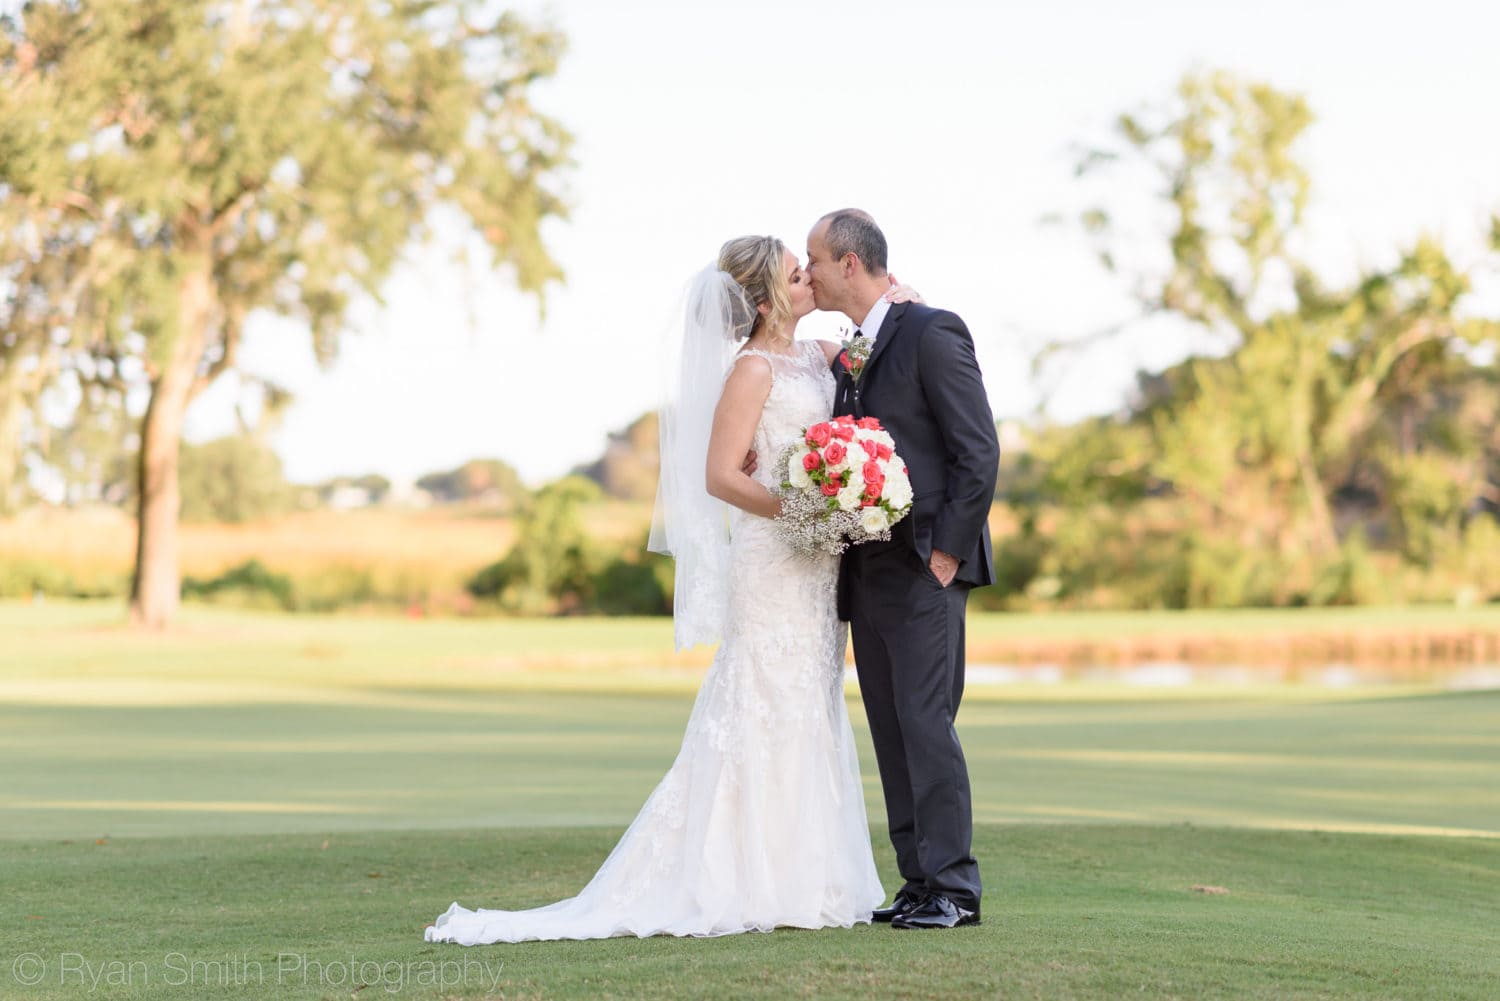 Couple kissing on the golf course - Pawleys Plantation